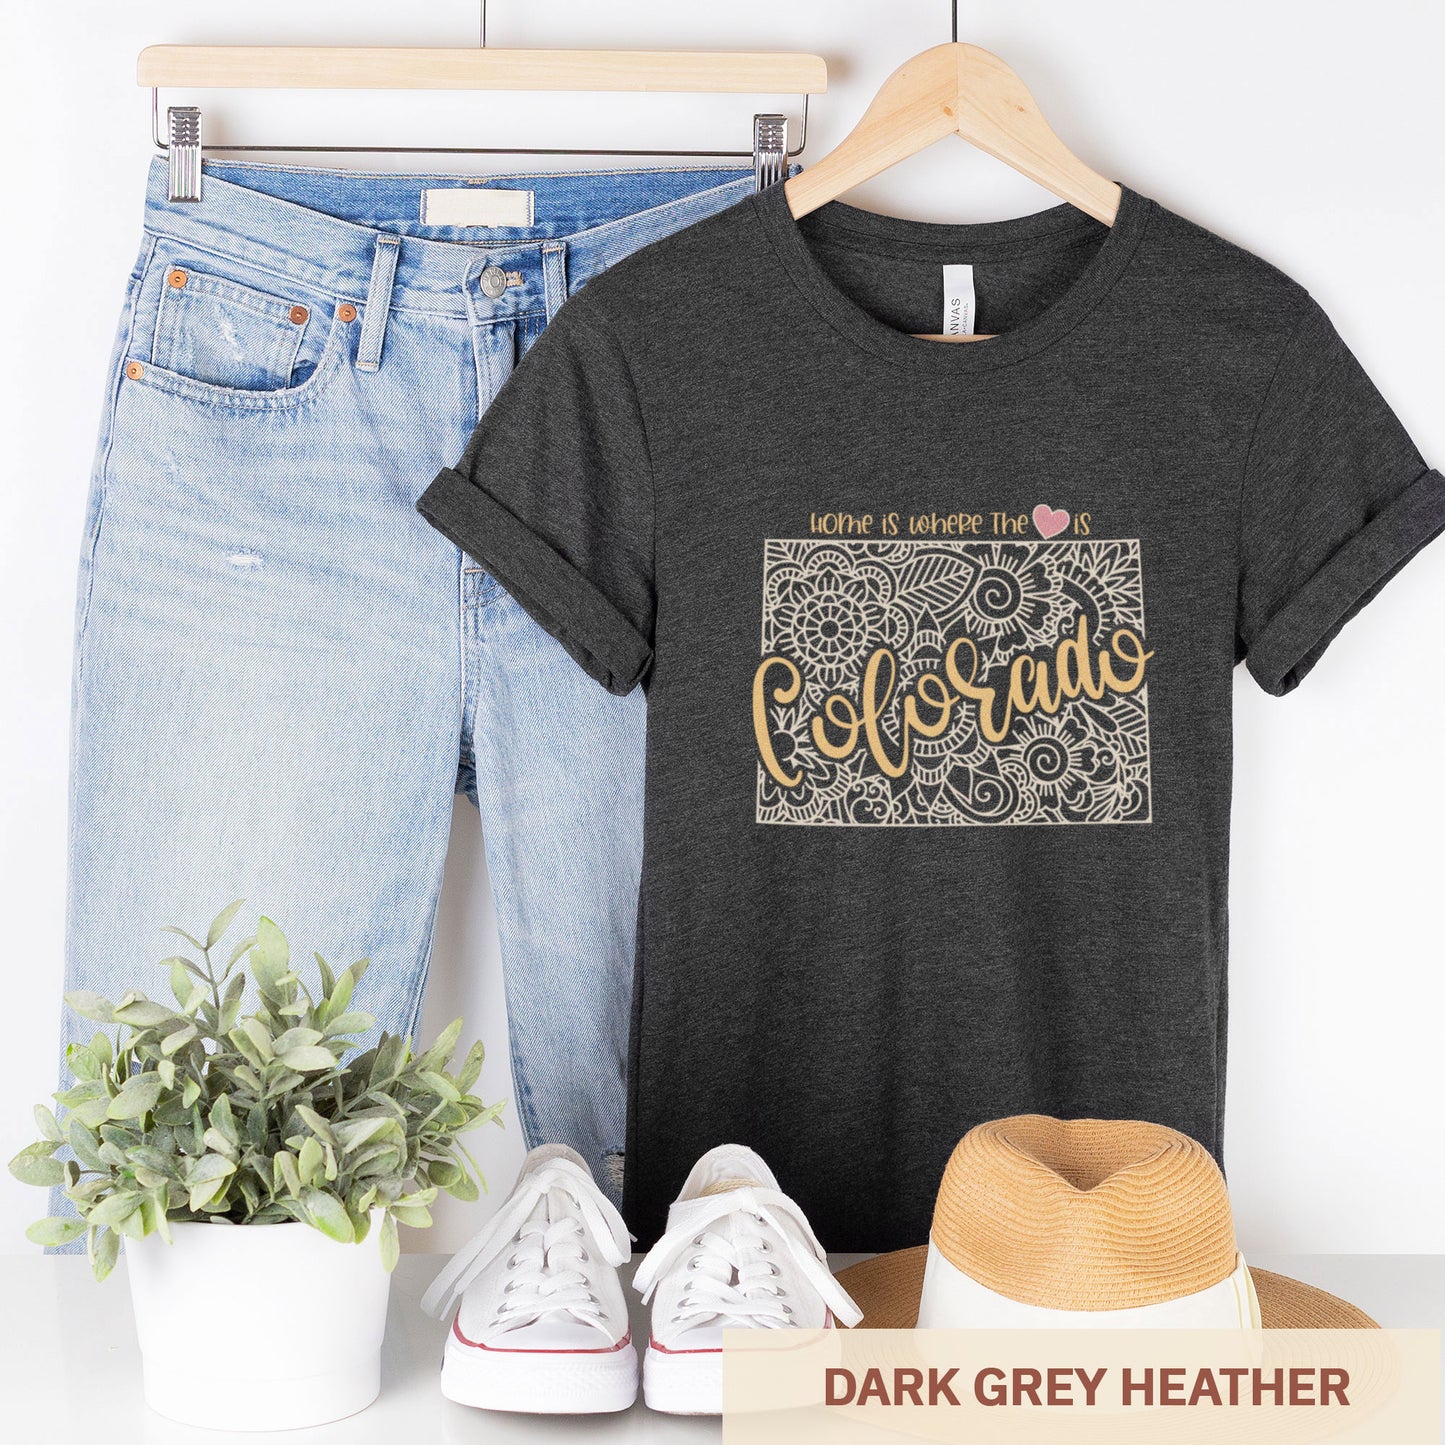  A hanging dark grey heather Bella Canvas t-shirt featuring a mandala in the shape of Colorado with the words home is where the heart is.